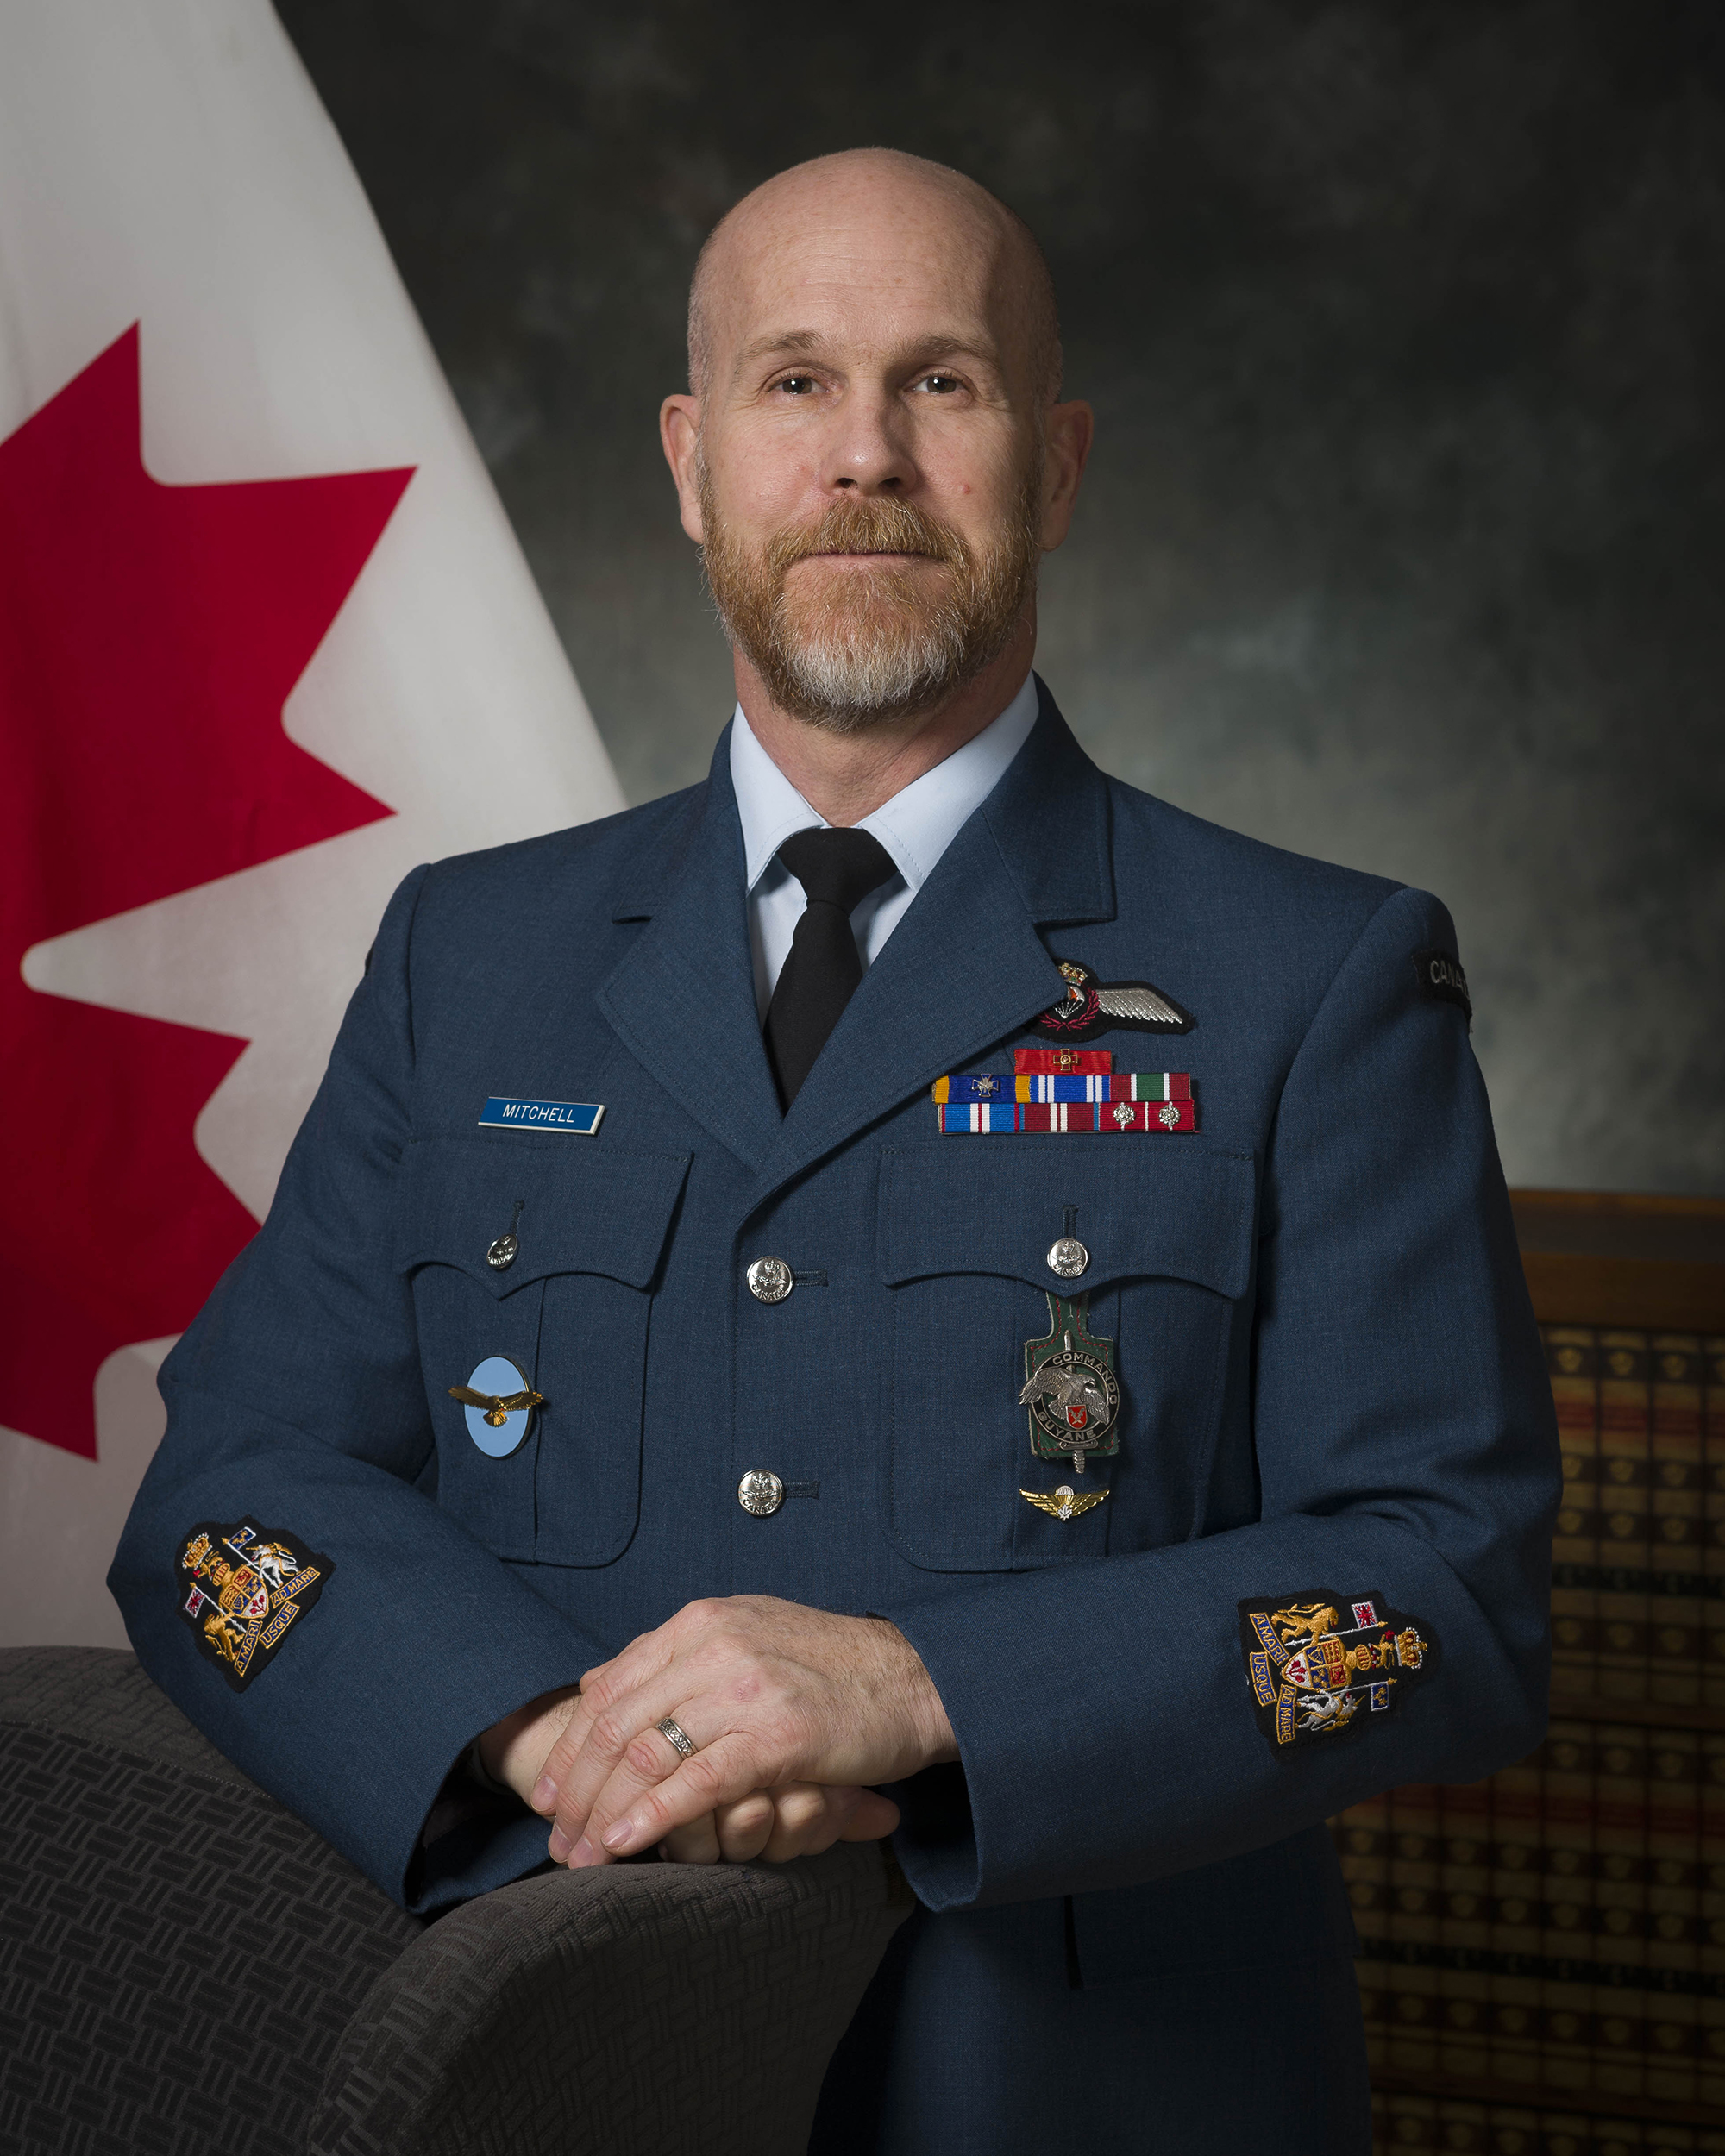 A photo of a man wearing a blue military uniform with medals. Behind him is a Canadian flag.